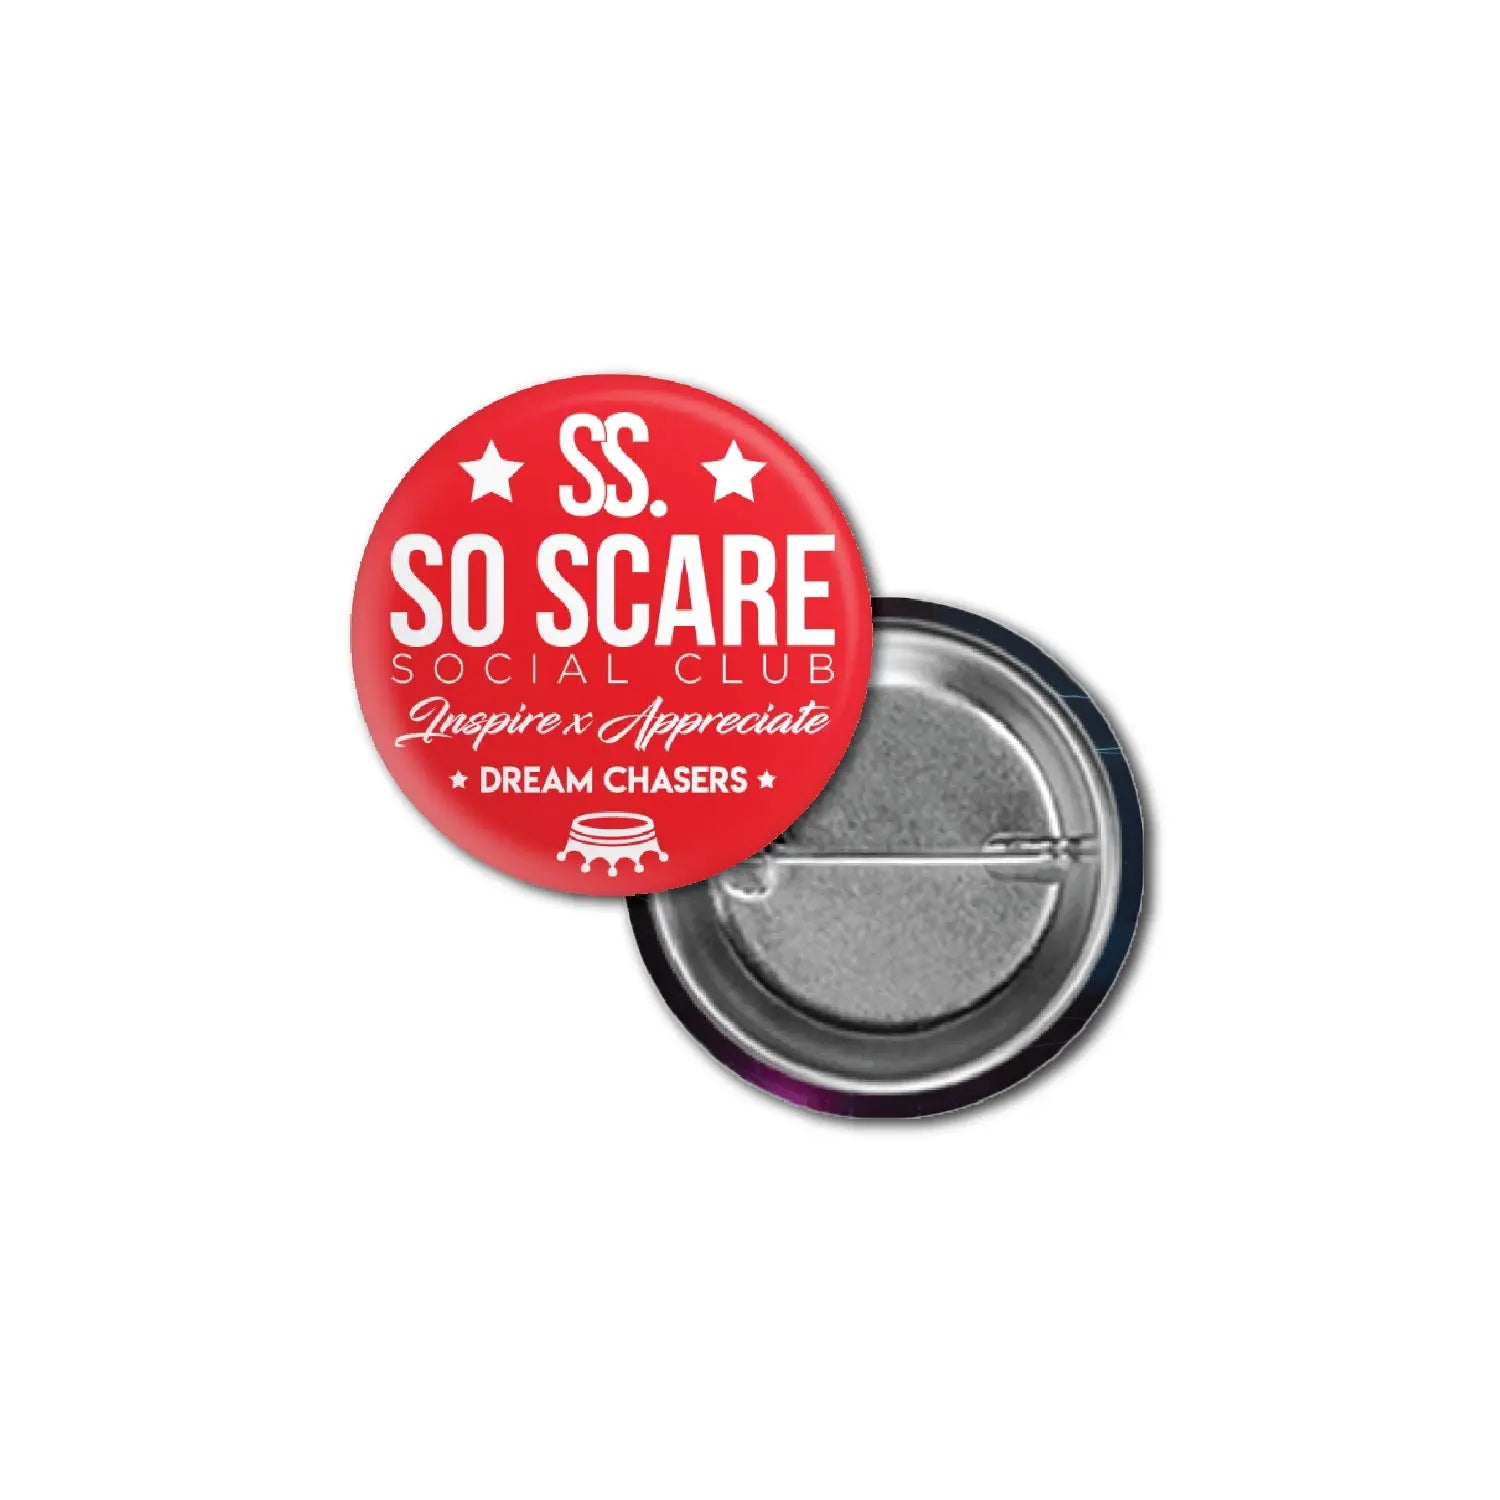 DREAM CHASERS CREST METAL PIN SO SCARE SOCIAL CLUB